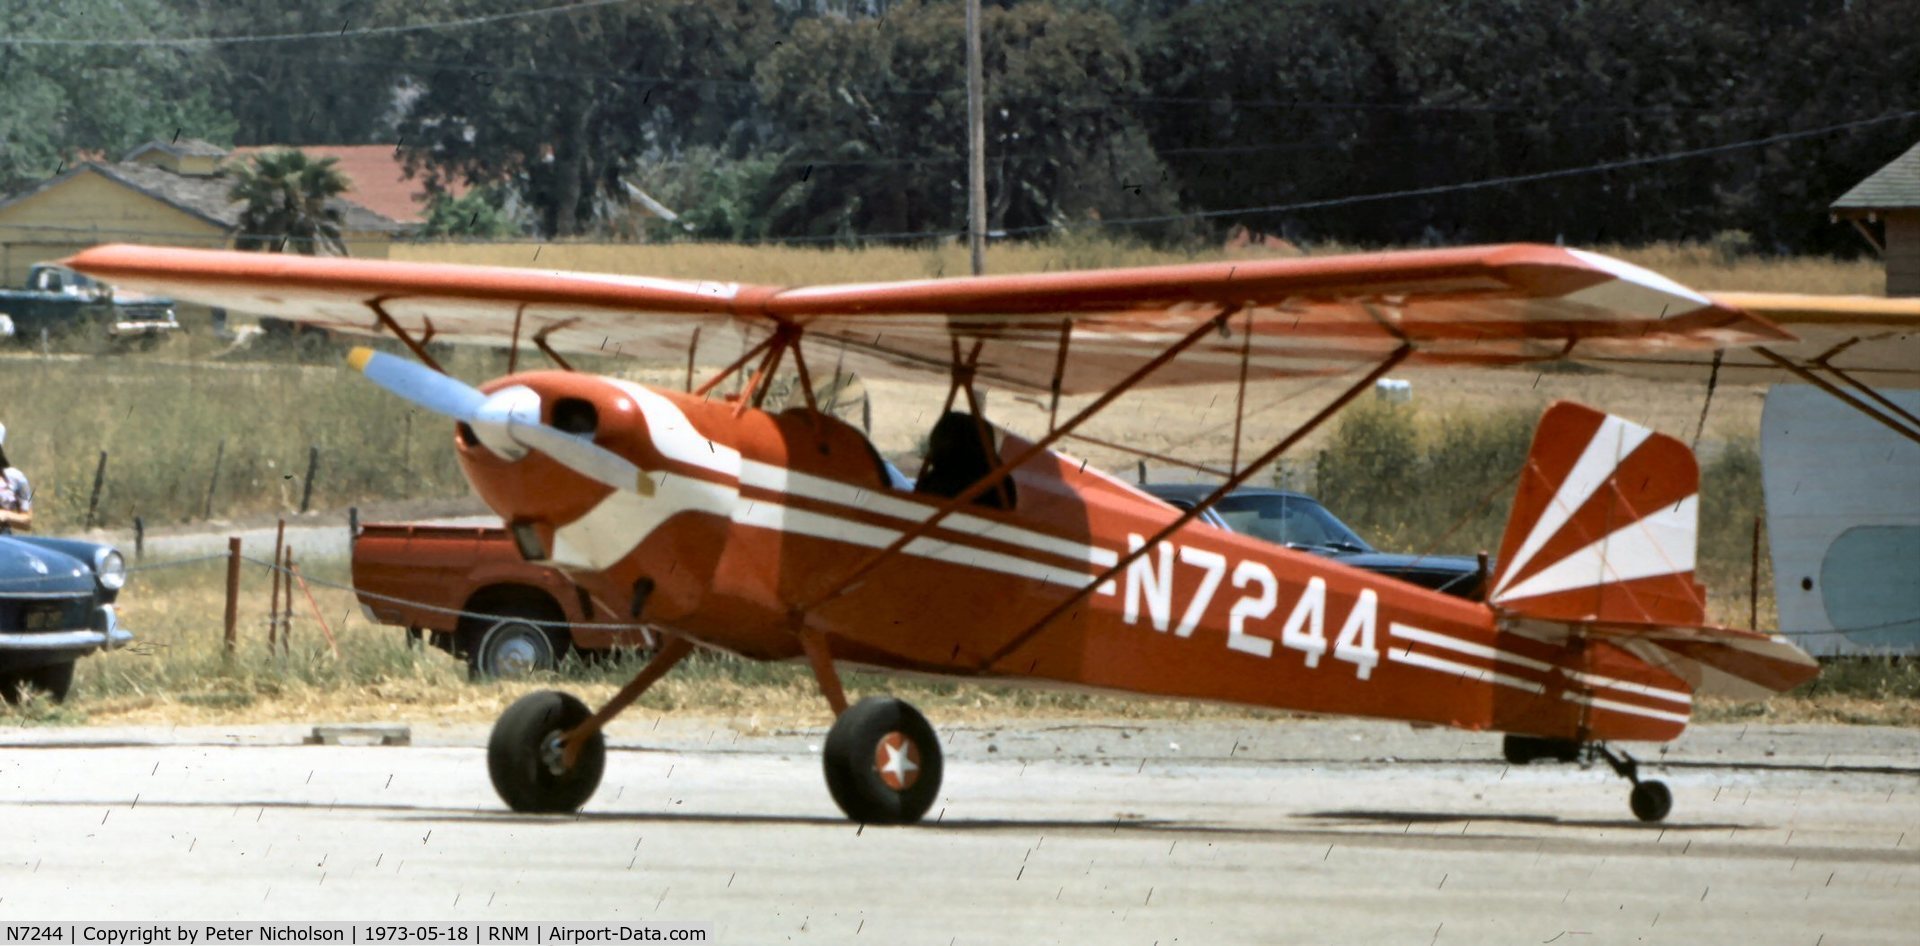 N7244, 1972 Argan Bright V & R BABY ACE C/N A-1, Appears to be a one-off type